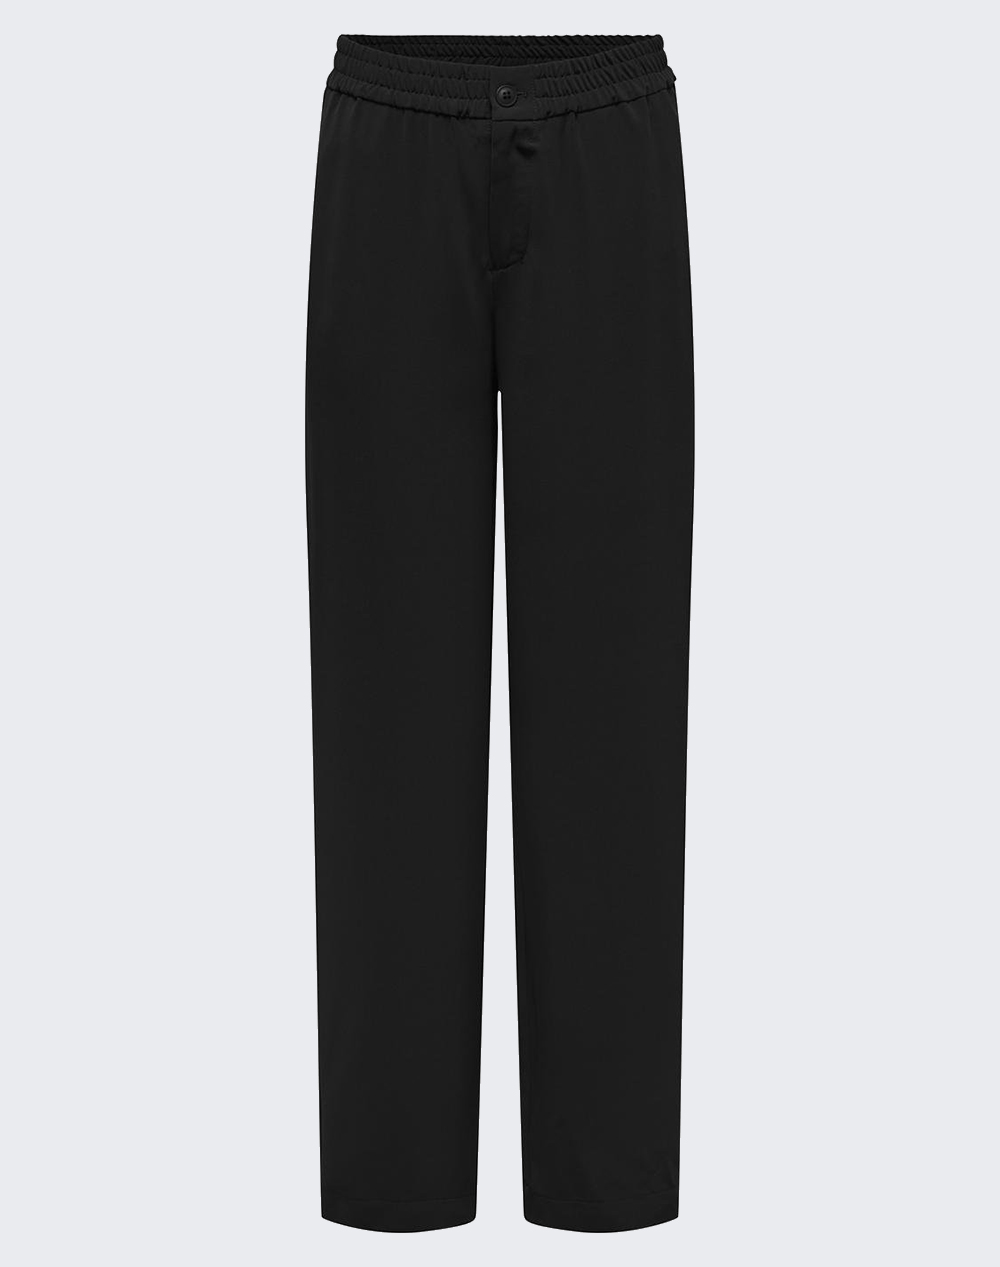 ONLY ONLLEILA MW PULL-UP WIDE PANT CC TLR 15310950-BLACK Black